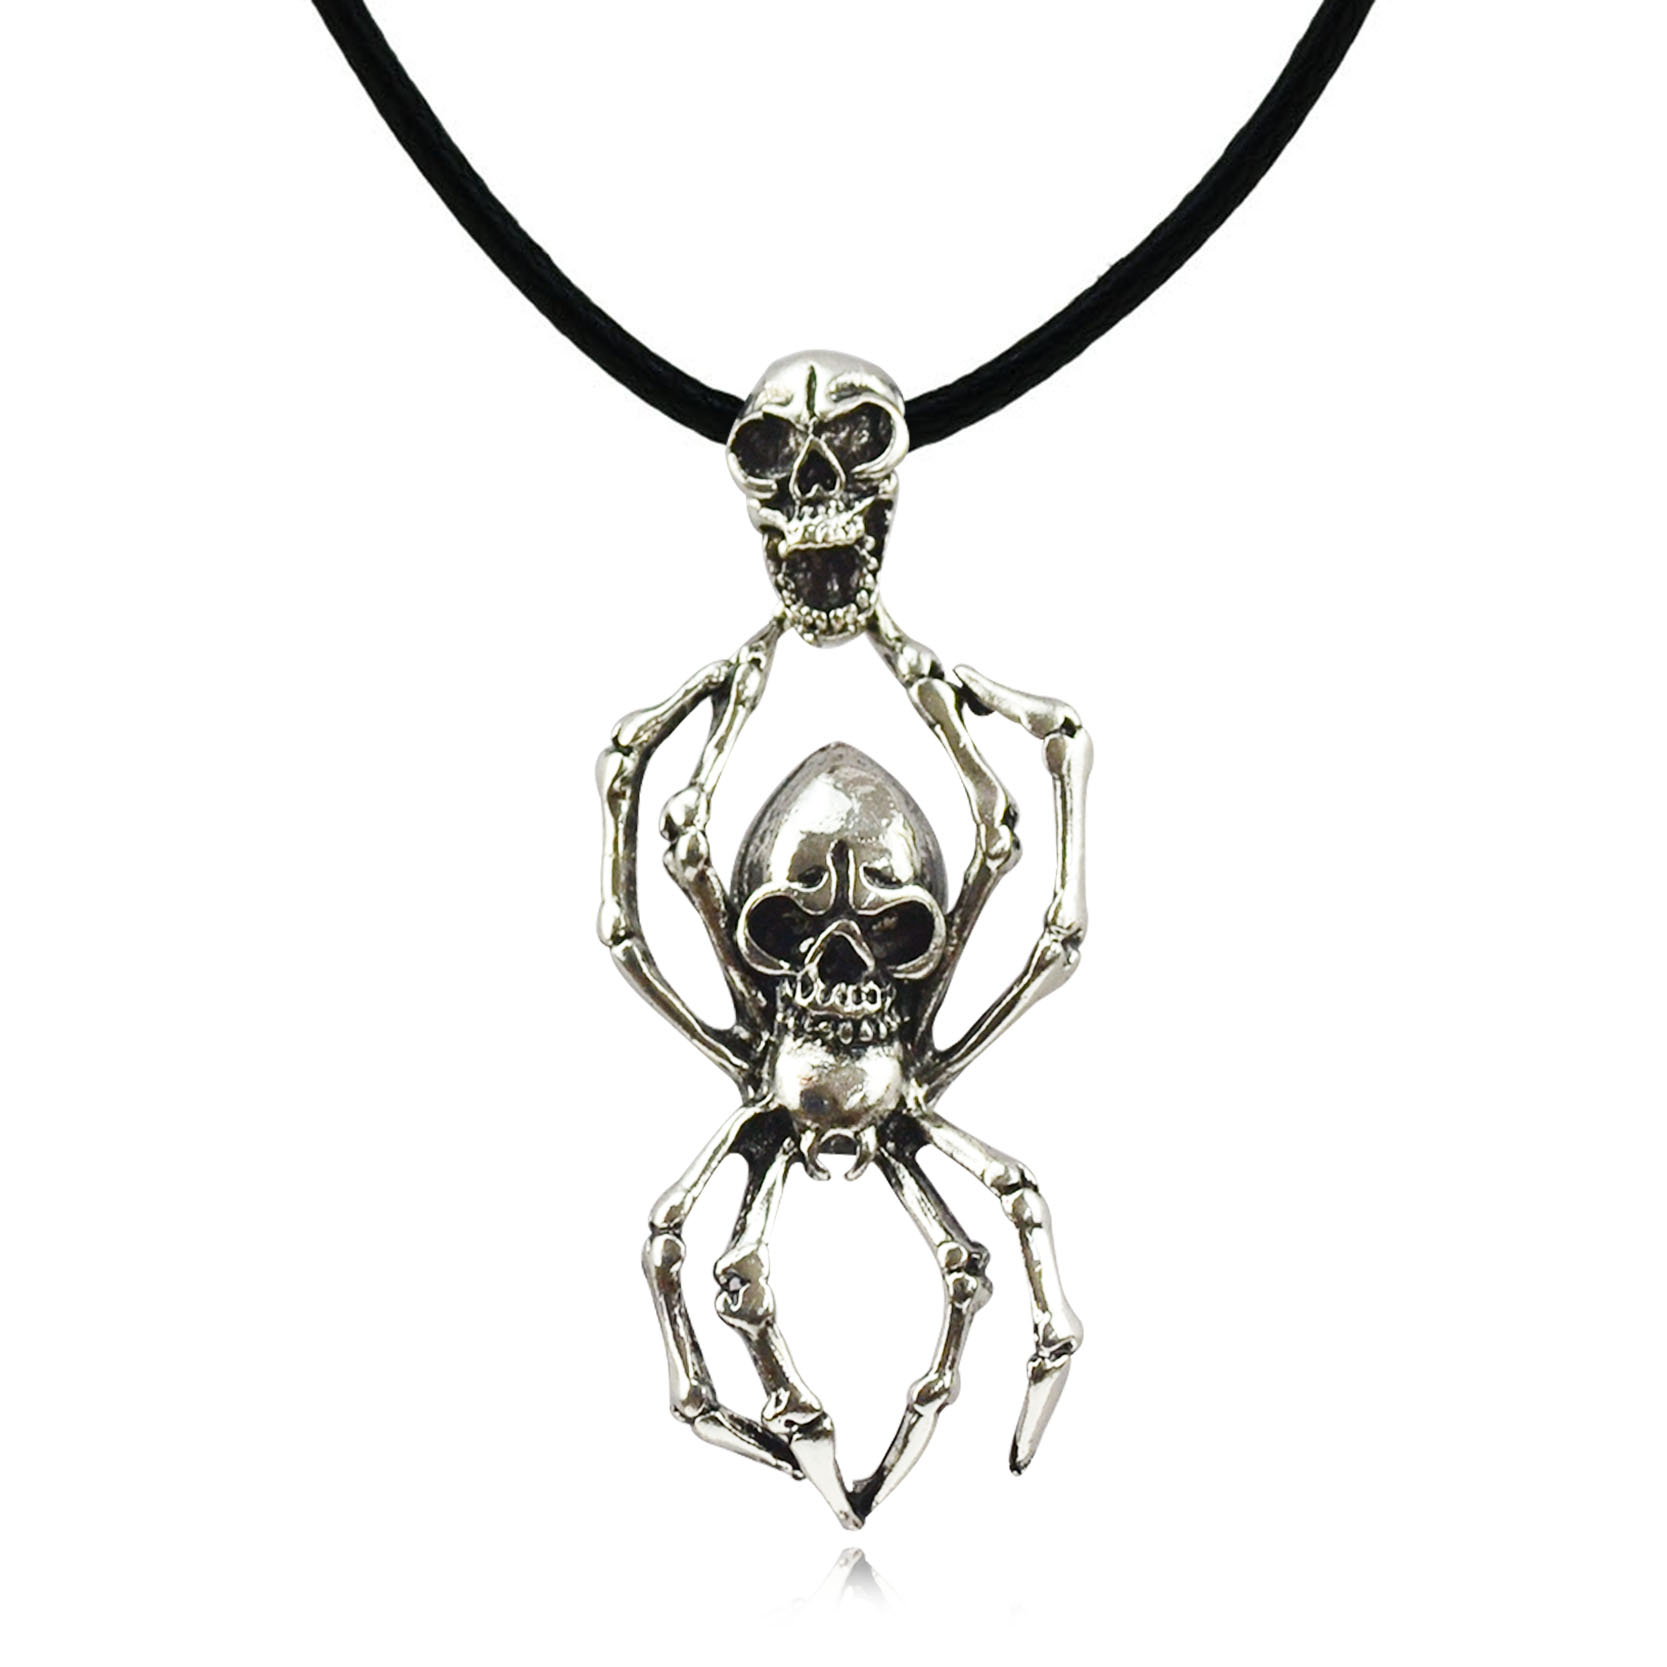 Punk Style Titanium Stainless Steel Spider Body Skeleton Head Pendant Necklace Wax Rope Chain Fashion Jewelry